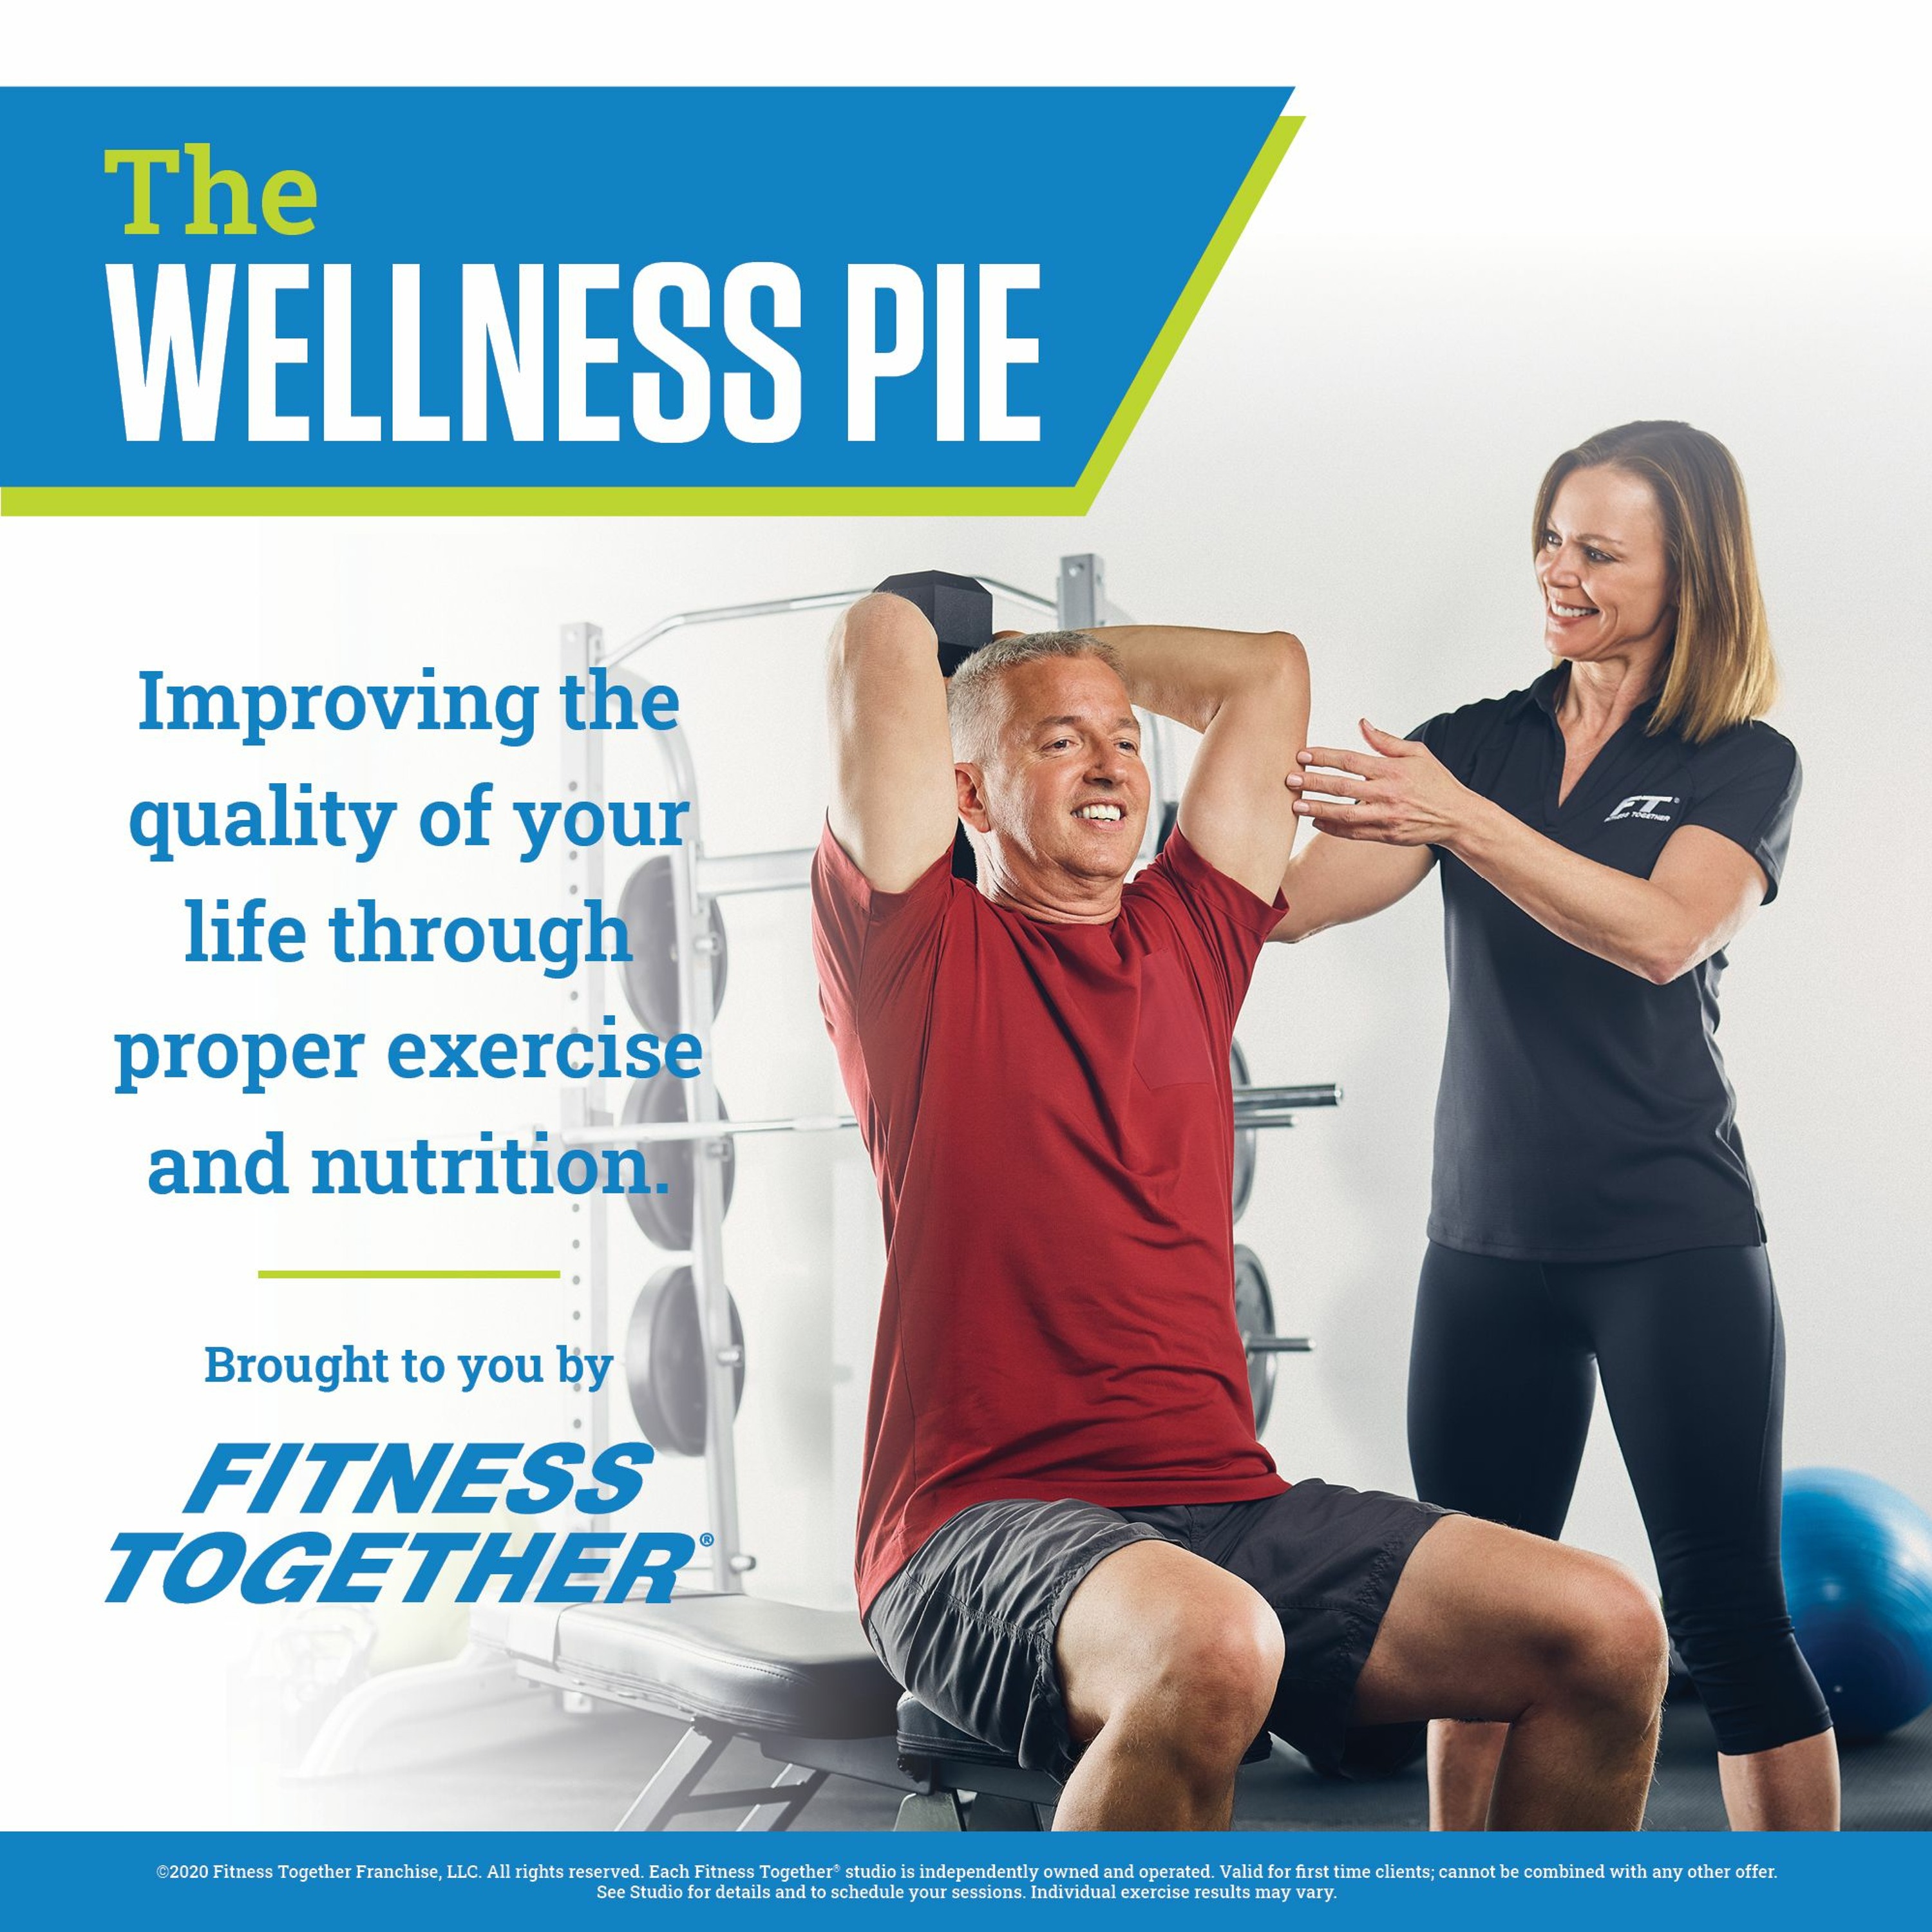 The Wellness Pie - Episode 7 How To Lose Weight And Keep Fat Off Without Stict Diet